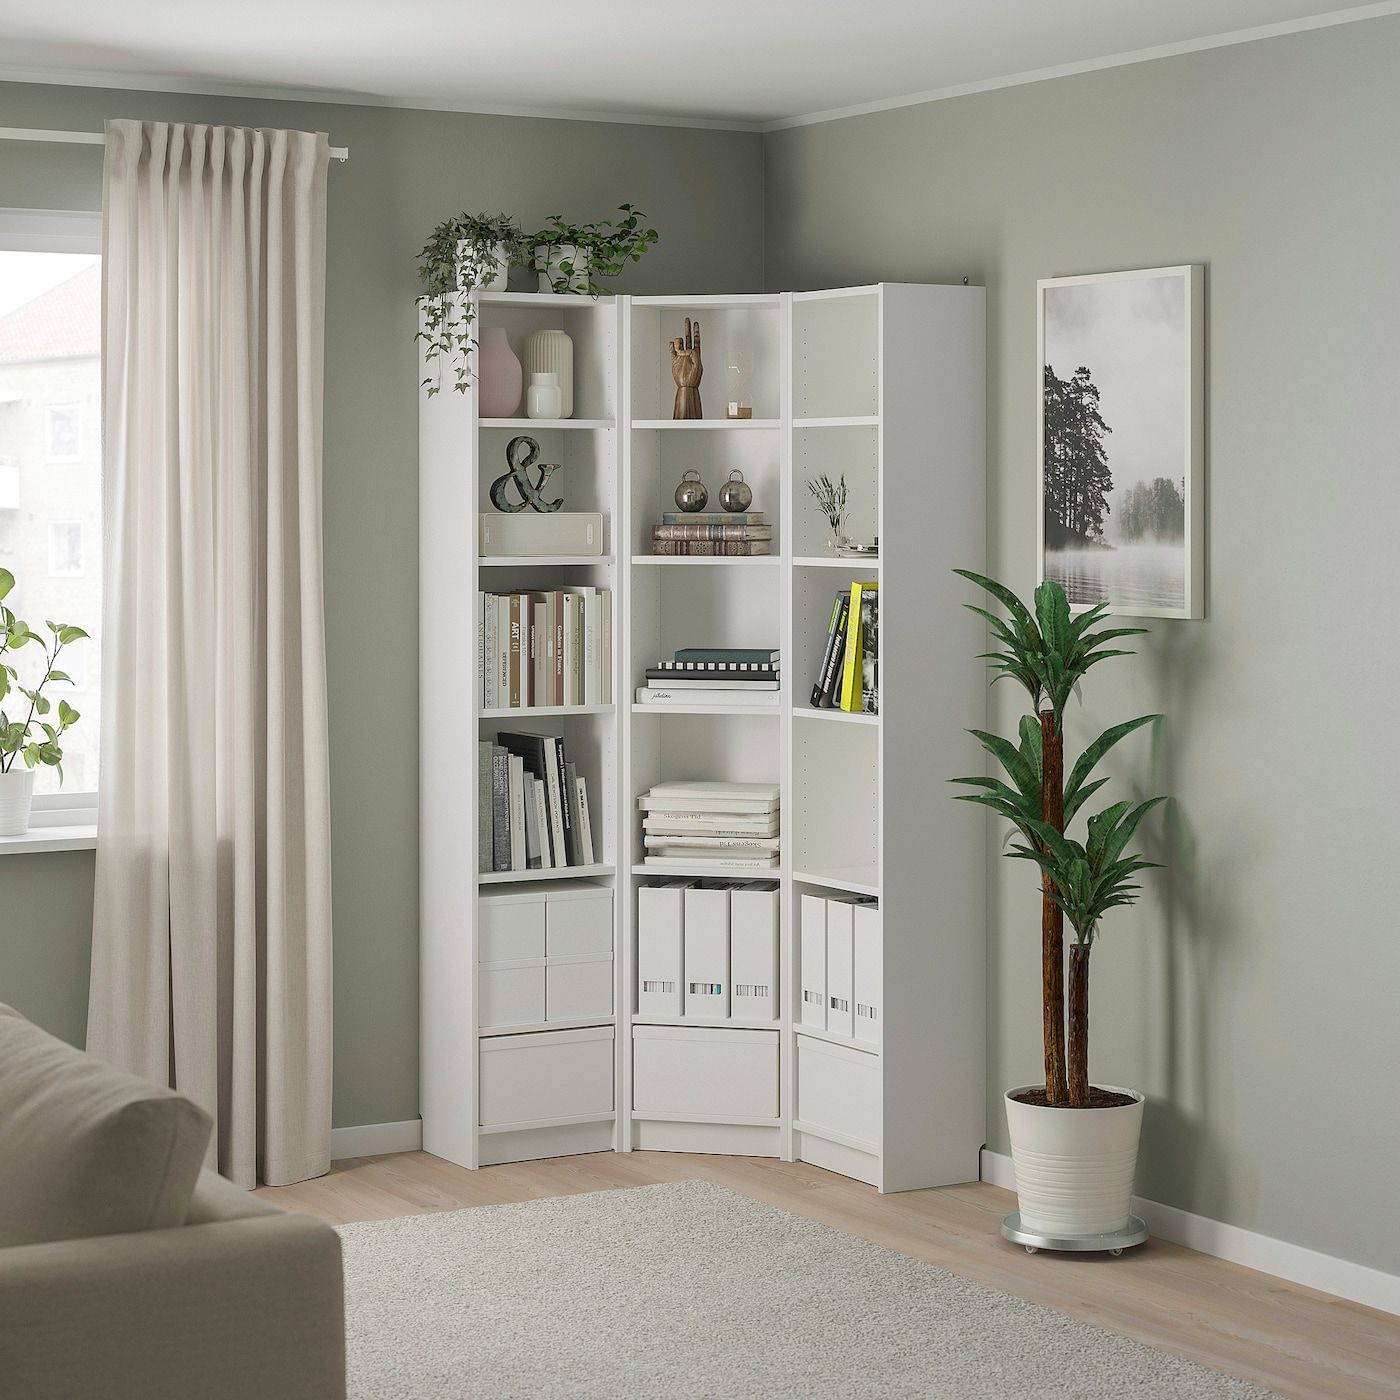 Billy Bookcase Combination/crn Solution, White, 373/8/373/8x11x791/2" – Ikea With Corner Bookcases (View 1 of 15)